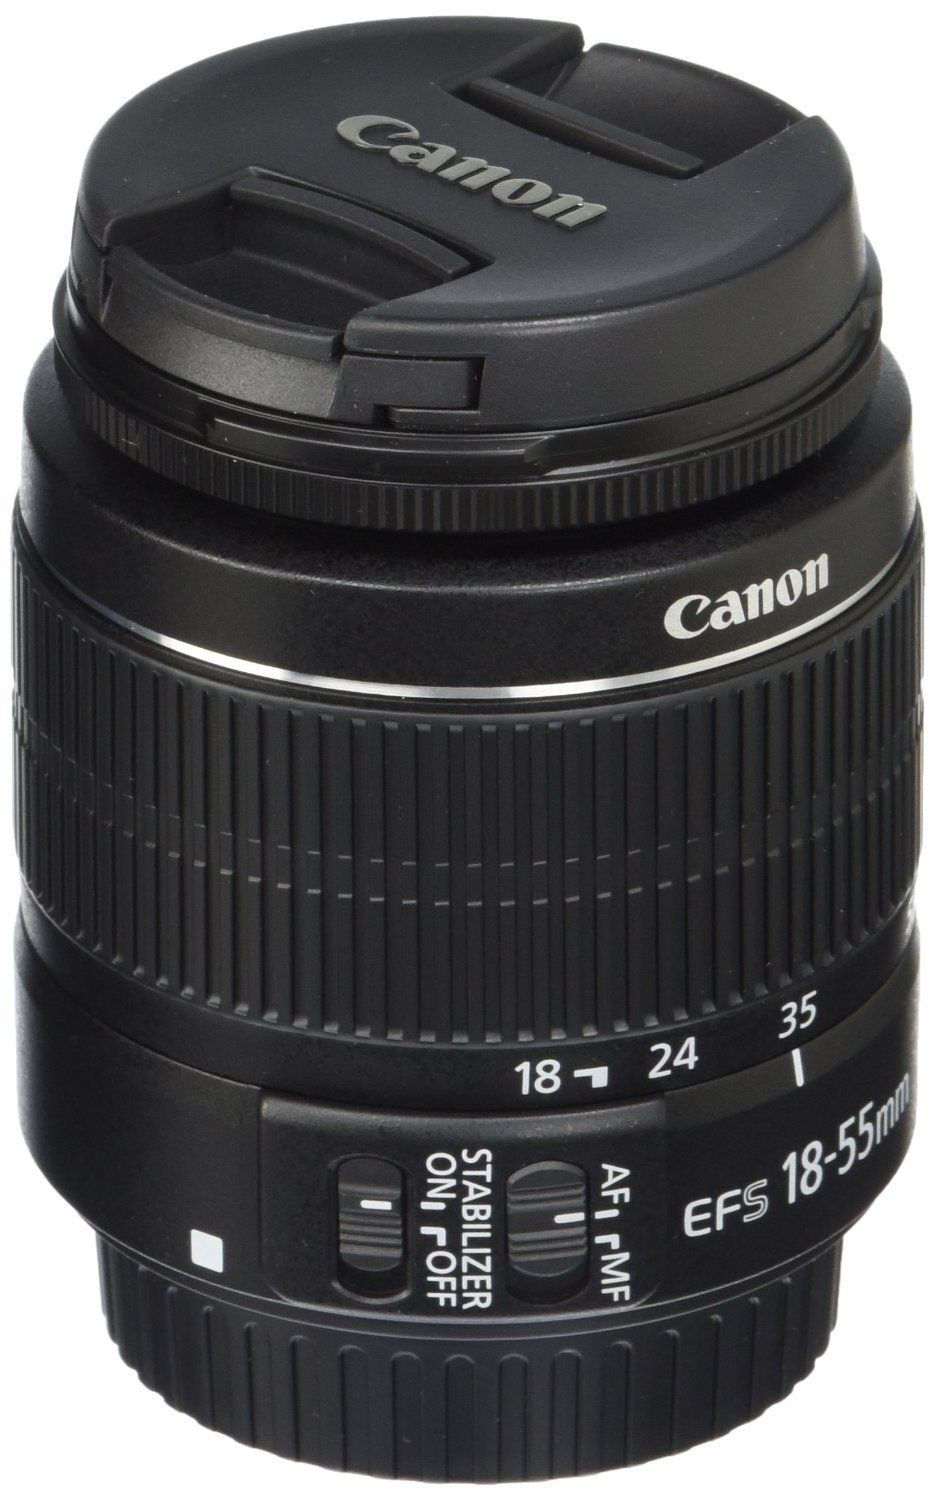 NEW Canon EF-S 18-55mm f/3.5-5.6 IS II Lens For Canon DSLR Zoom Autofocus Lens Canon 2042B002